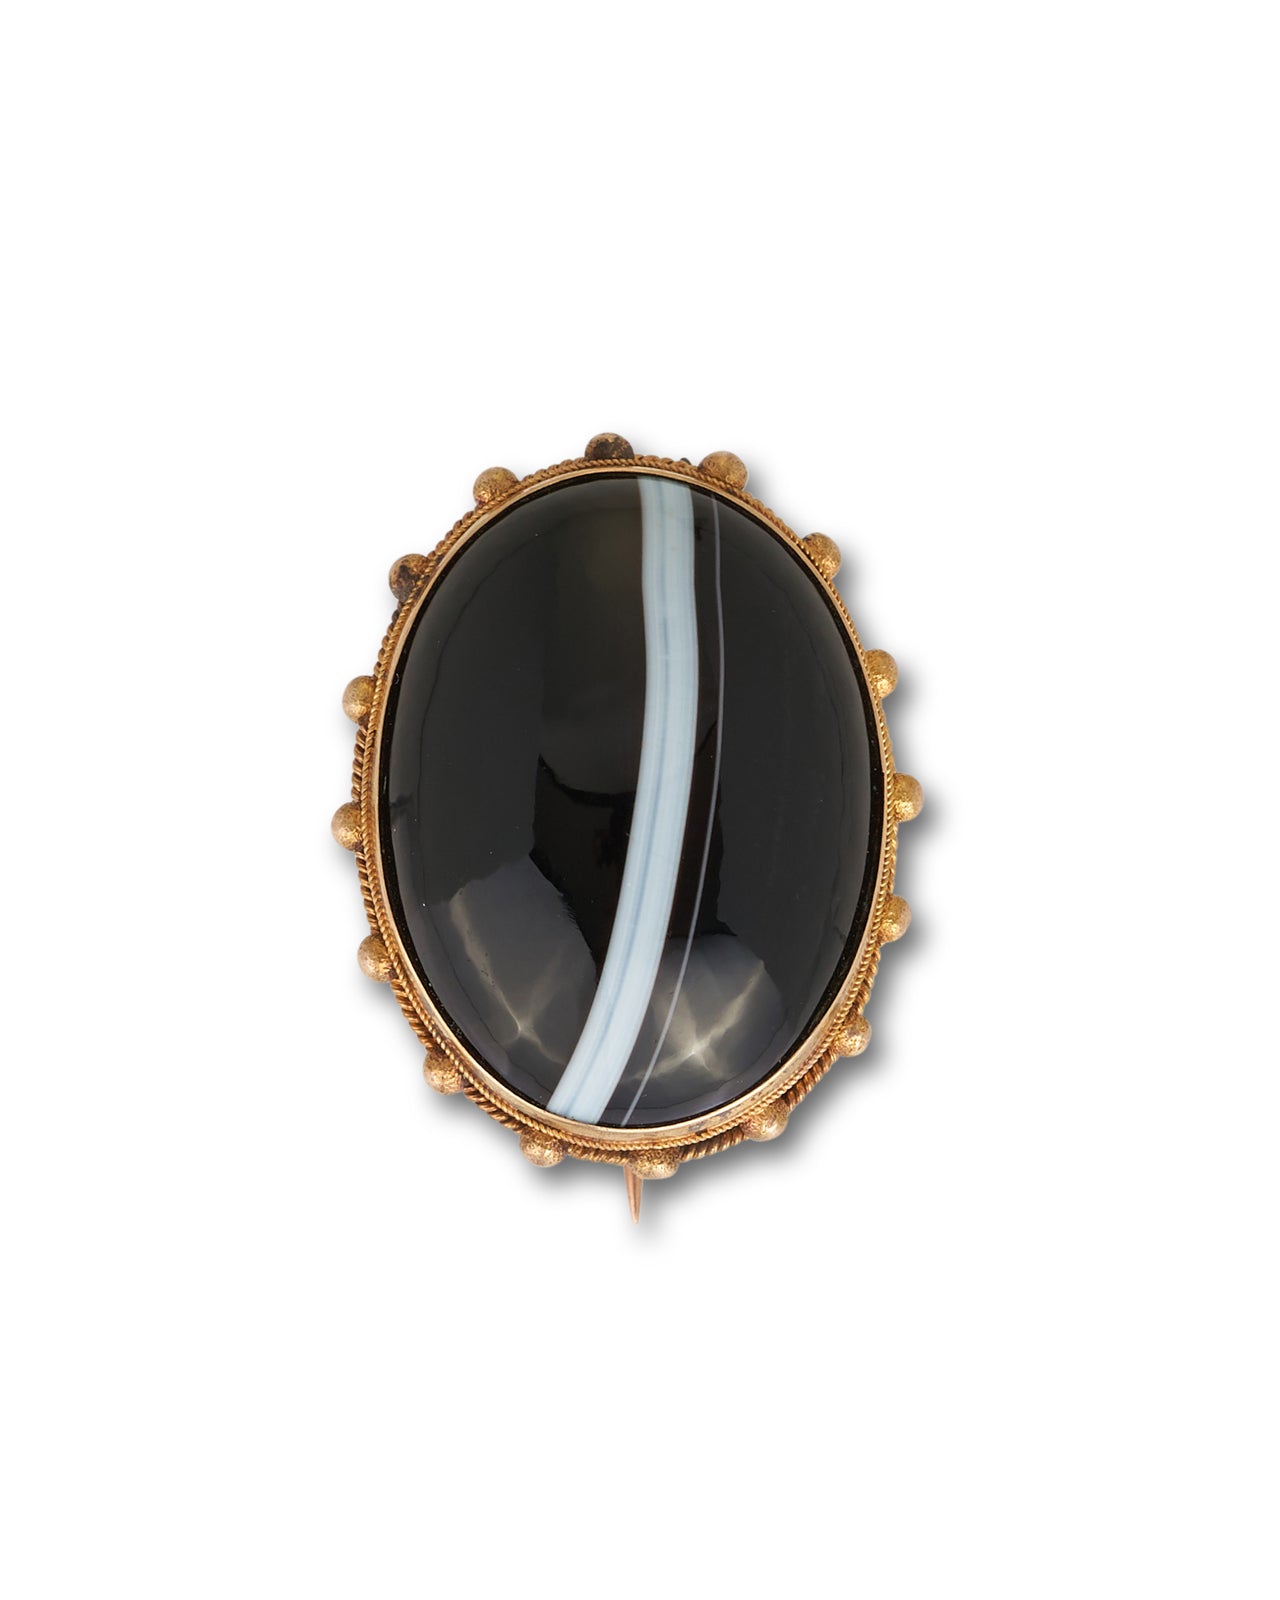 Antique Victorian banded agate mourning brooch, circa 1900